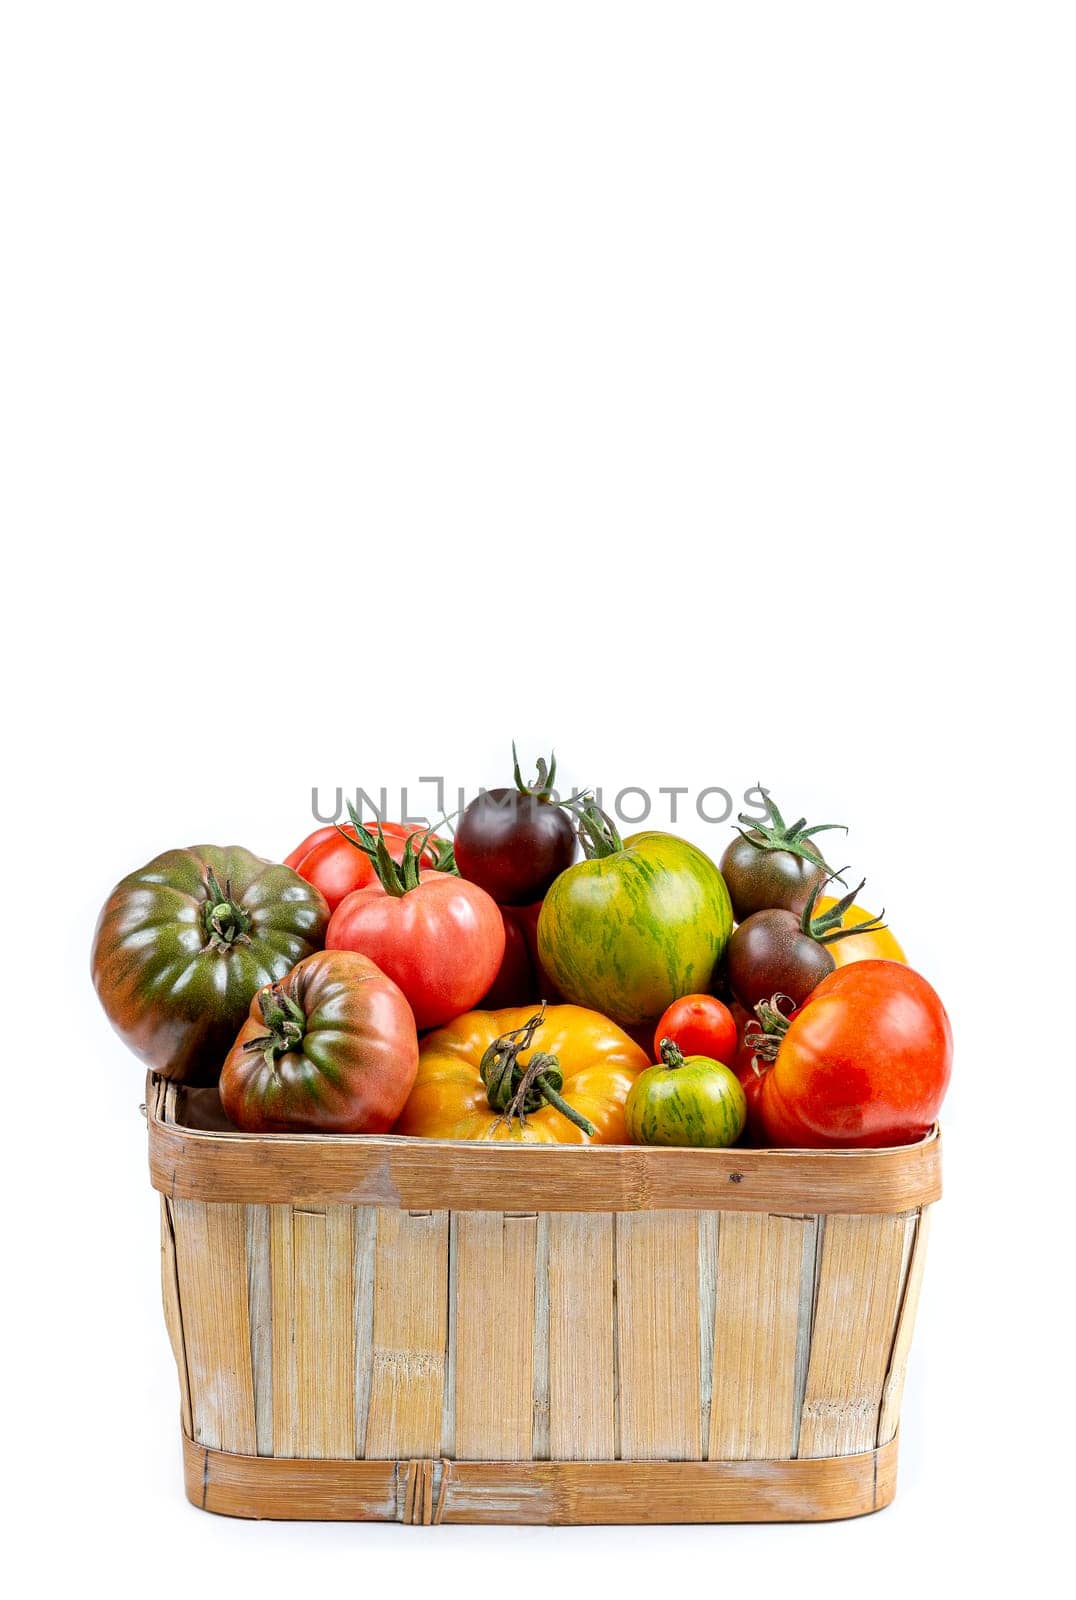 Basket full of freshly harvested heirloom and heritage tomatoes from the garden allotment. Multicoloured, red, green, black, purple, orange and yellow tomatoes ready to eat